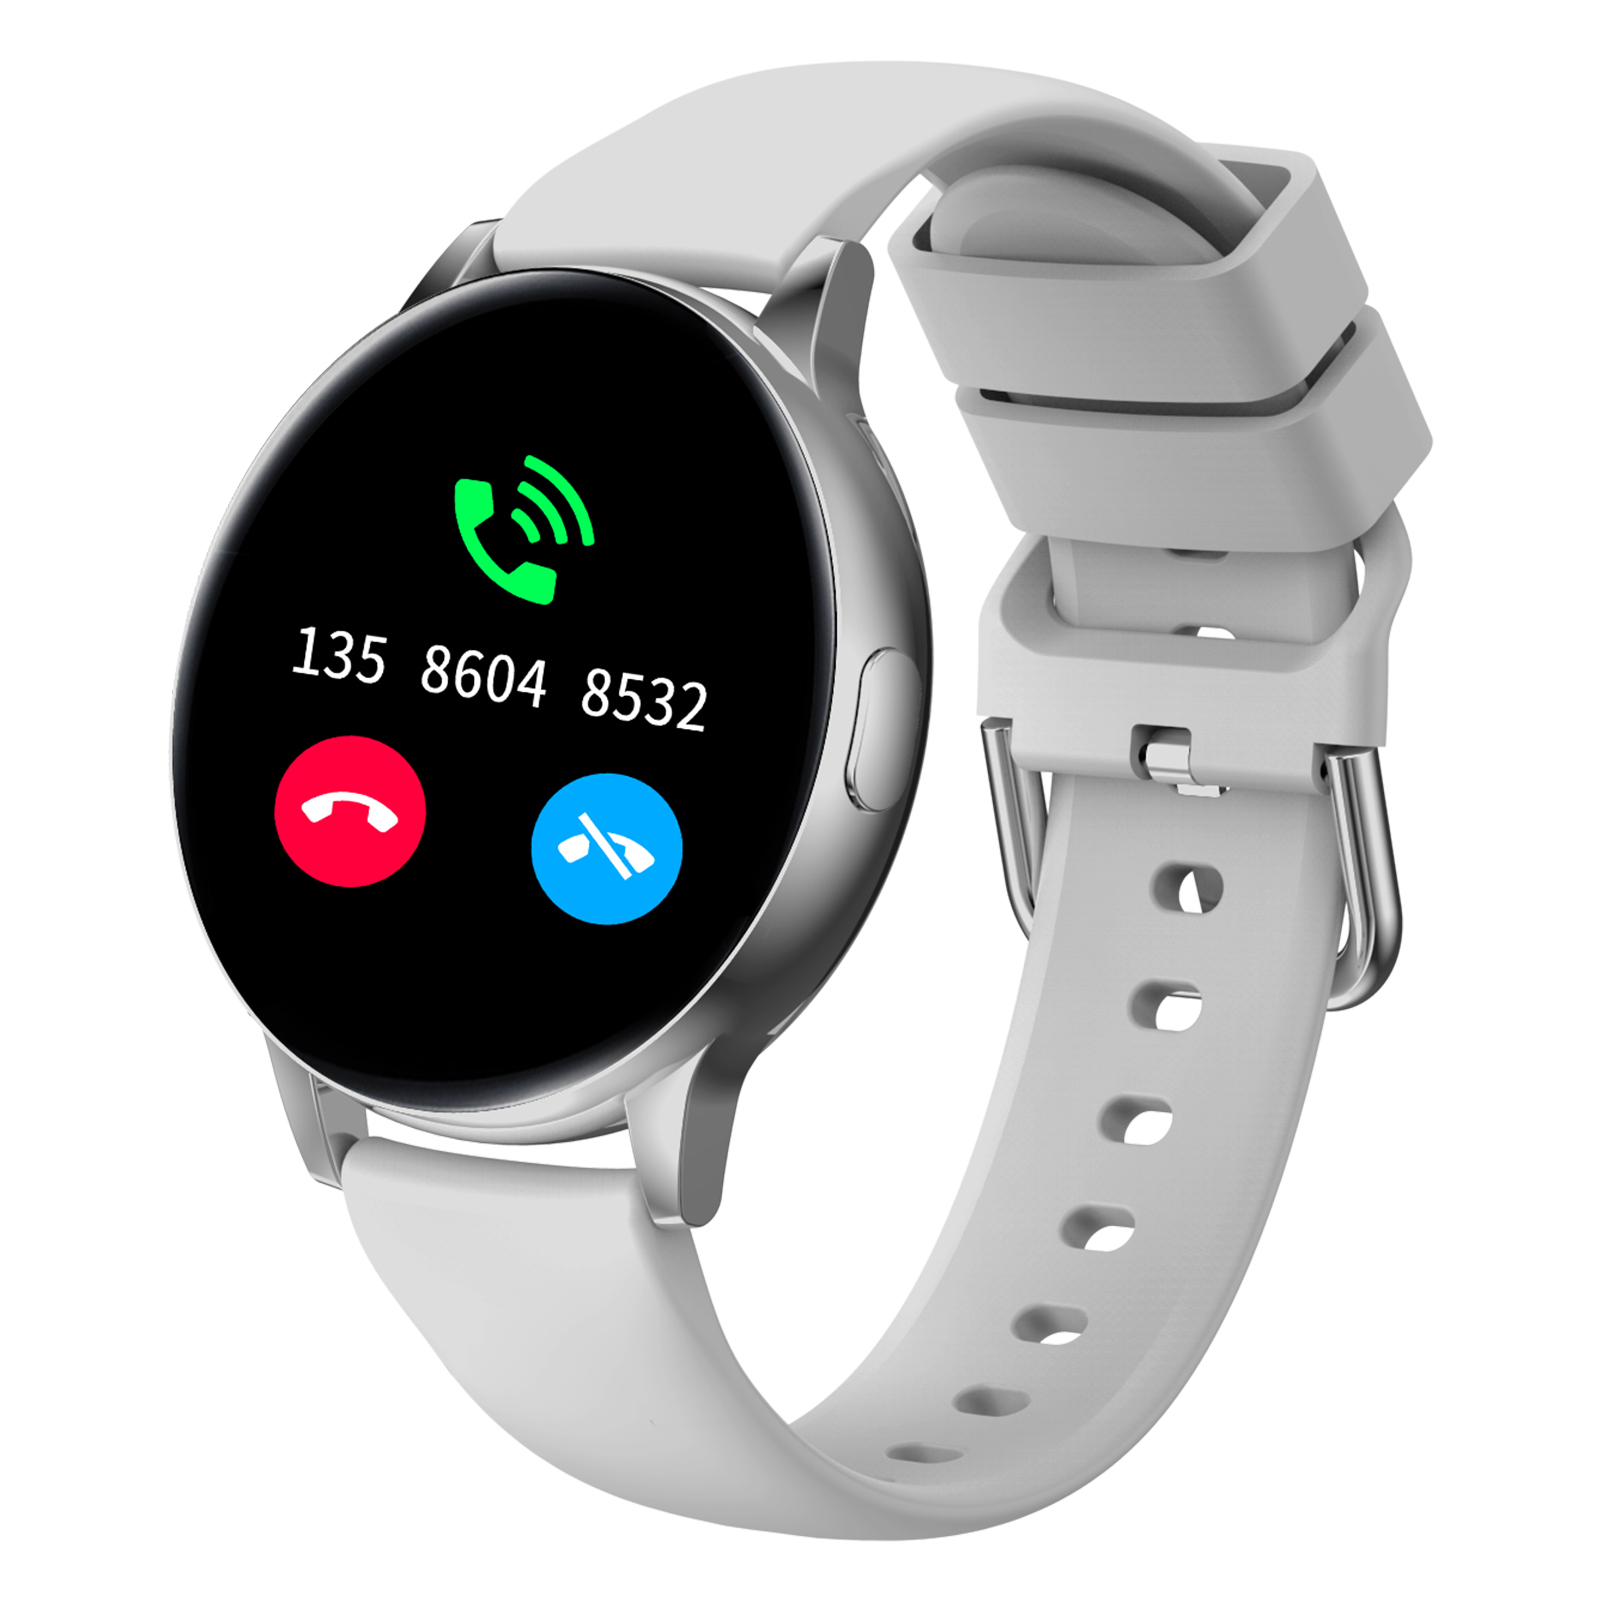 Multilingual Smart Sport Watch 1.4-inch Screen Step Counting Sport TimeMile Calorie Counting Heart Rate Blood Pressure - Silver